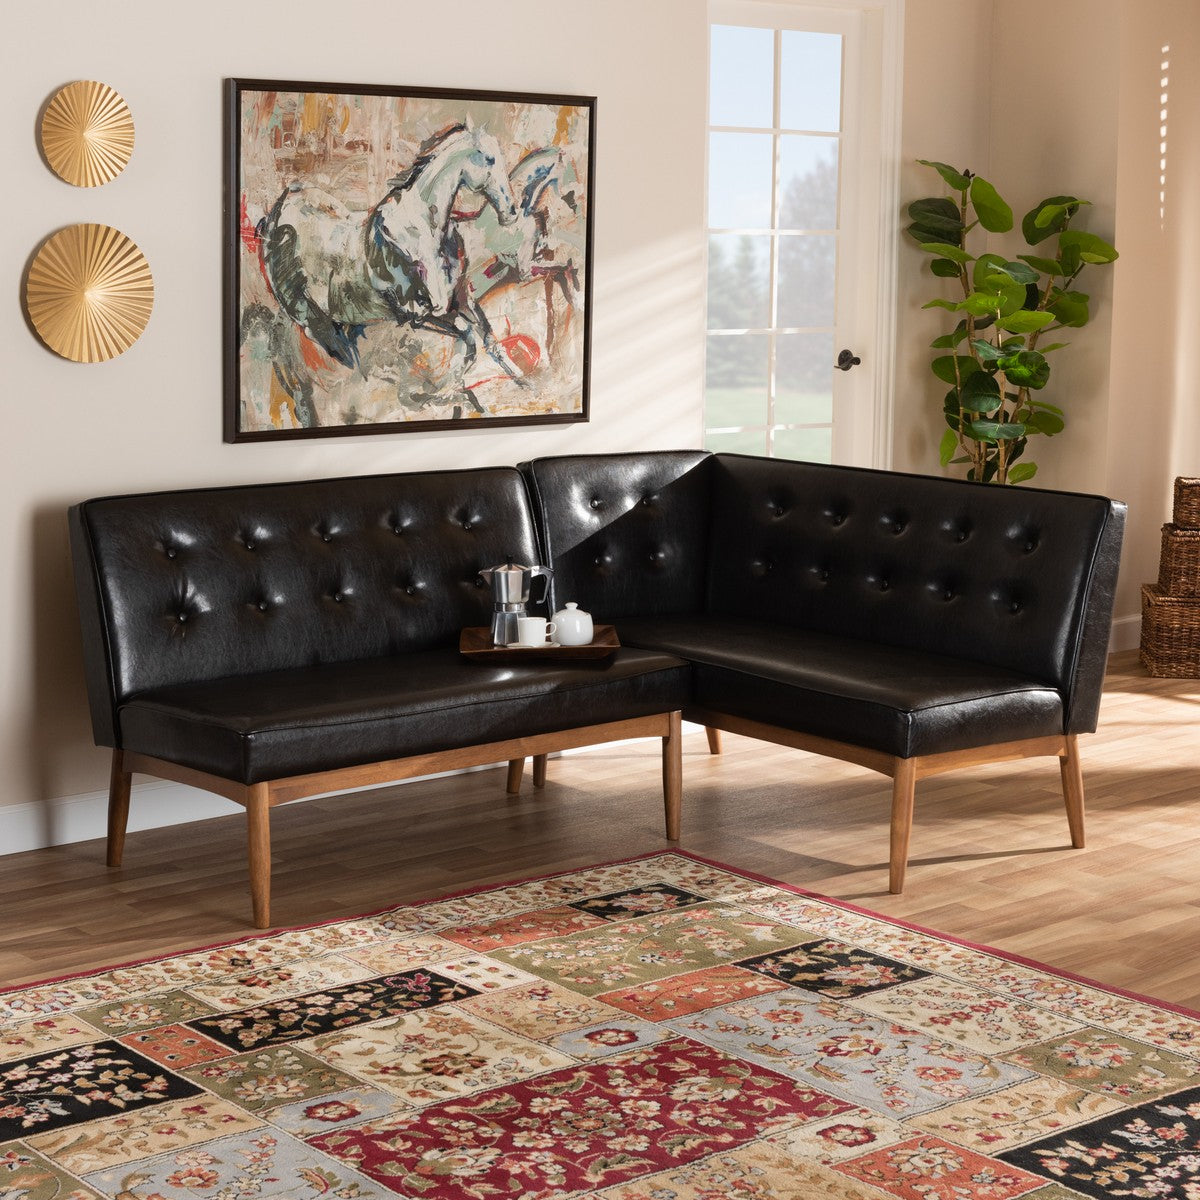 Baxton Studio Arvid Mid-Century Modern Dark Brown Faux Leather Upholstered 2-Piece Wood Dining Nook Banquette Set